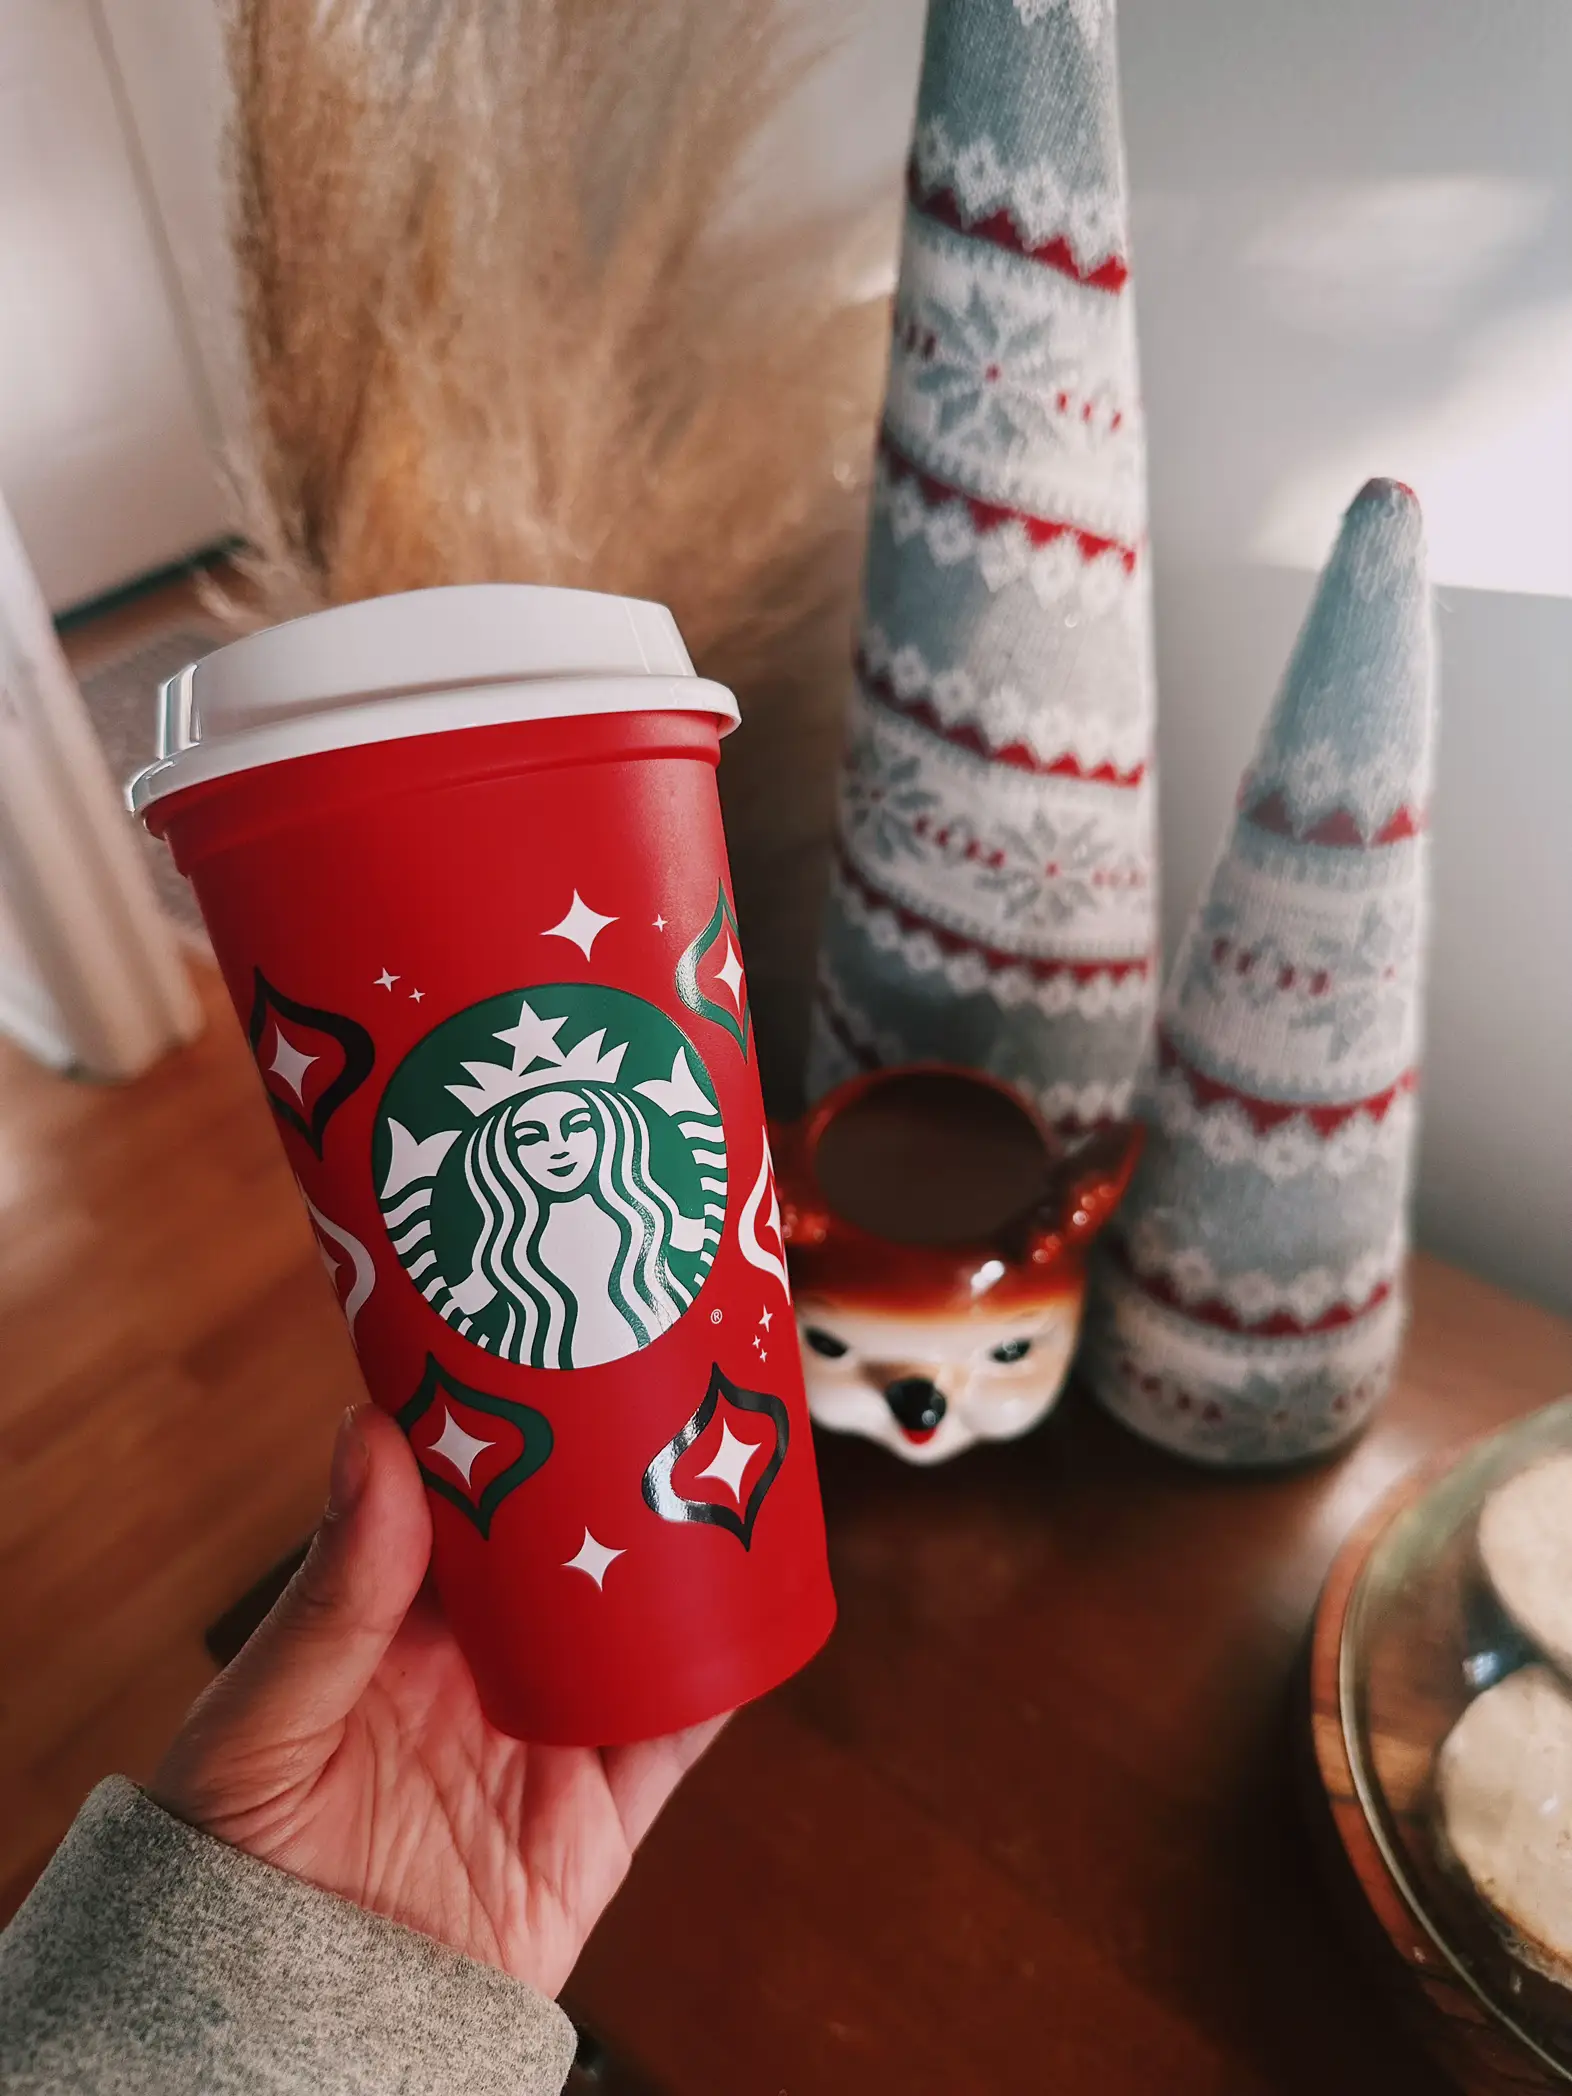 Starbucks Red Cup Day is today